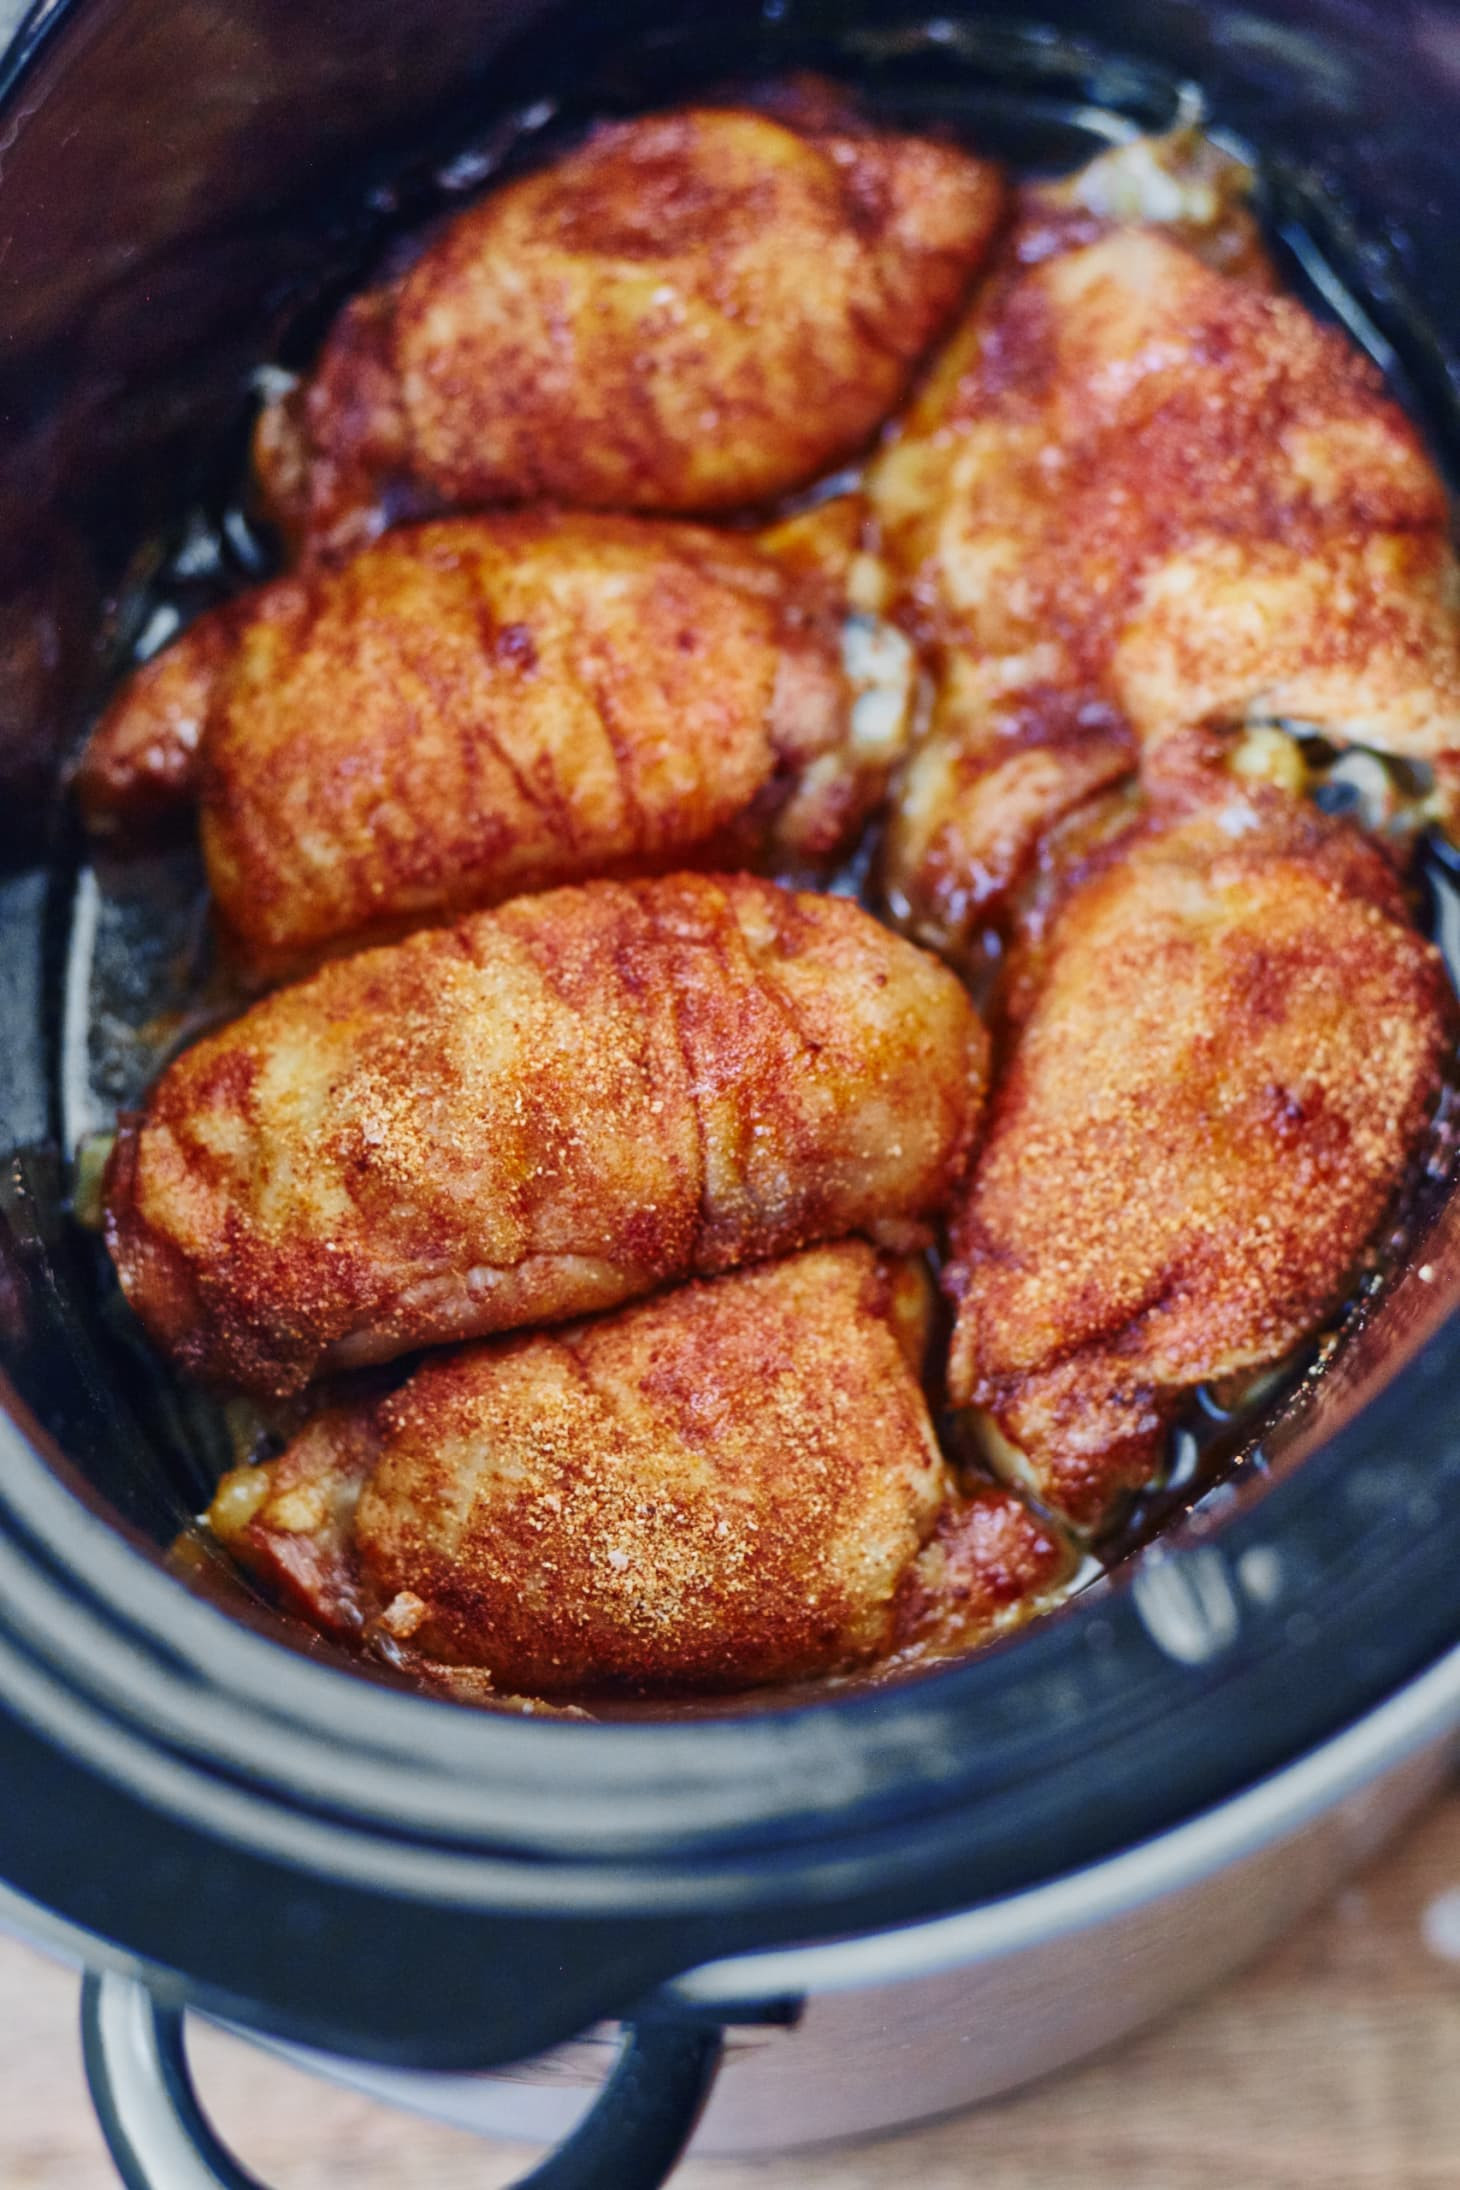 Chicken Thighs In Slow Cooker
 How To Make Crispy Juicy Chicken Thighs in the Slow